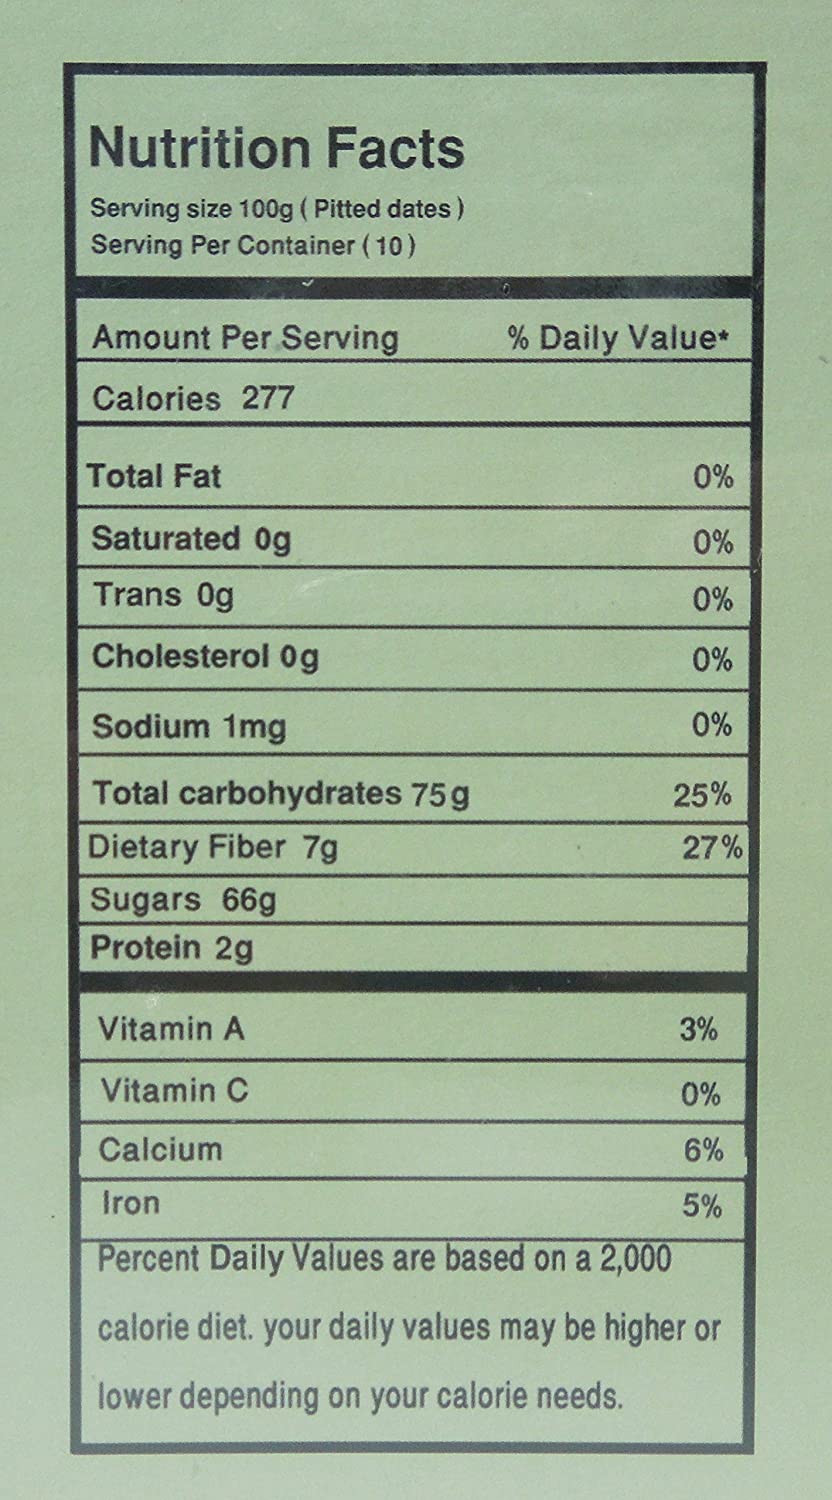 Nutrition facts of Almadina Dates Premium Quality 2 Lbs